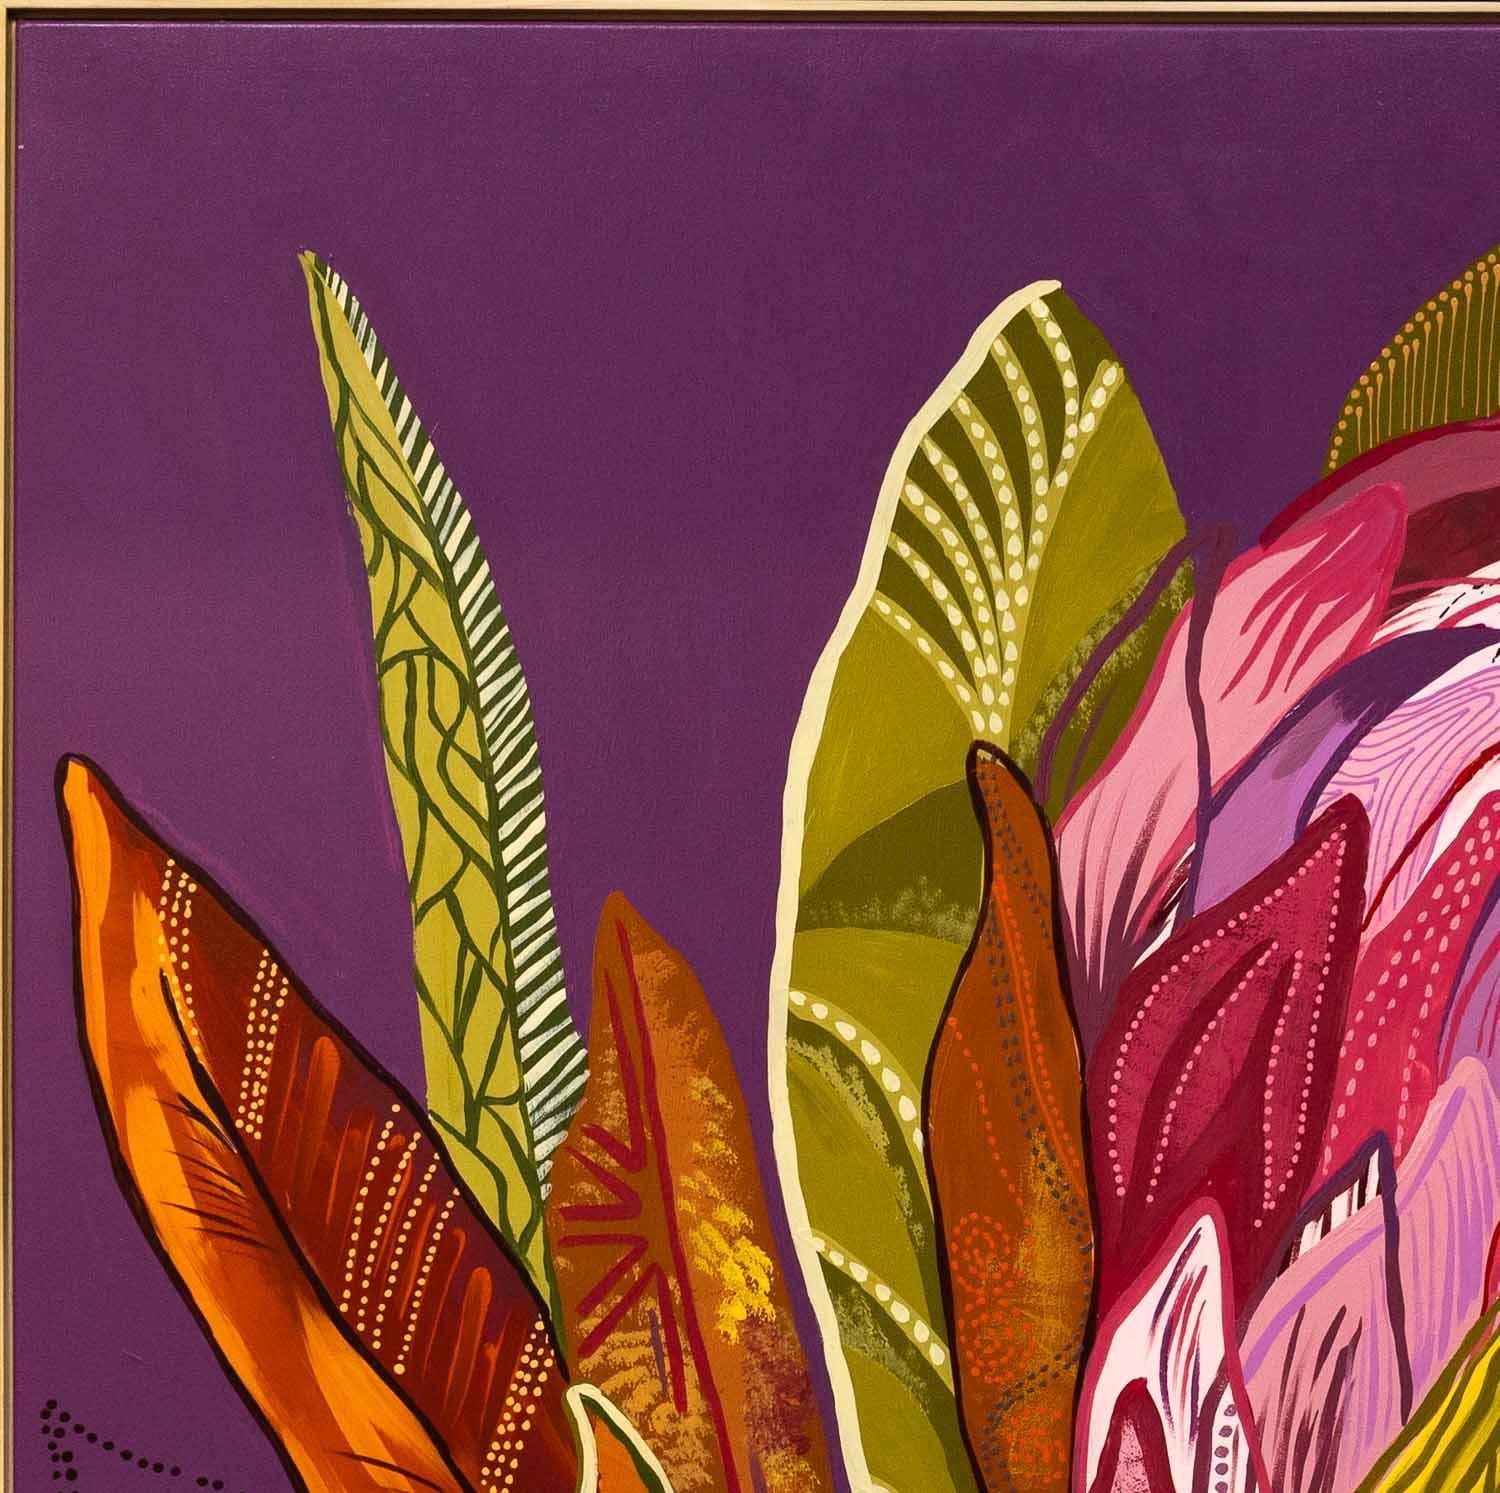 Artwork by Giada Pasquetto, Protea in Bloom, Made of Mixed media on canvas